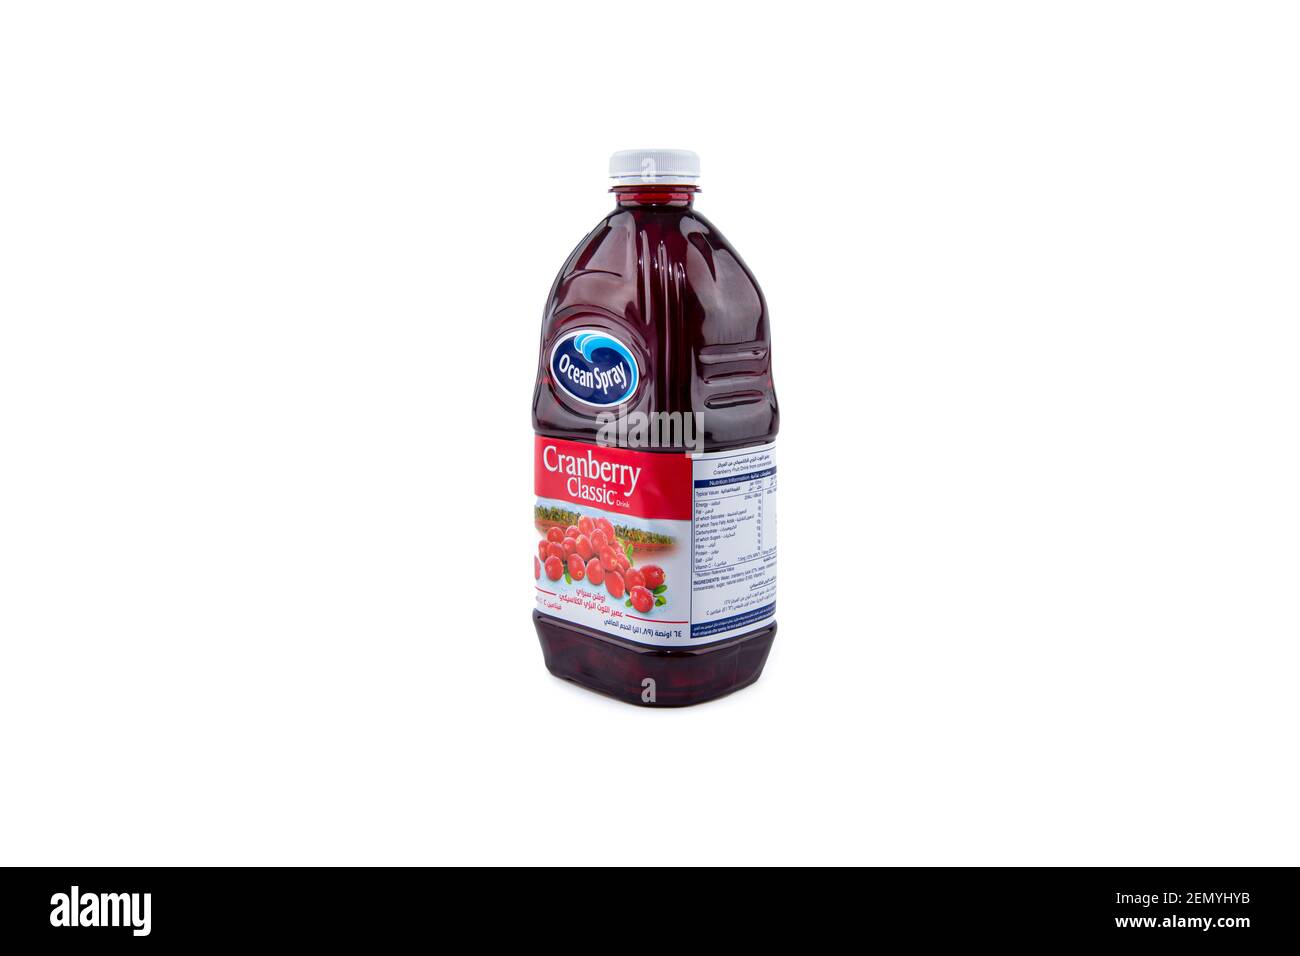 Ocean Spray Cranberry classic Juice on isolated background Stock Photo